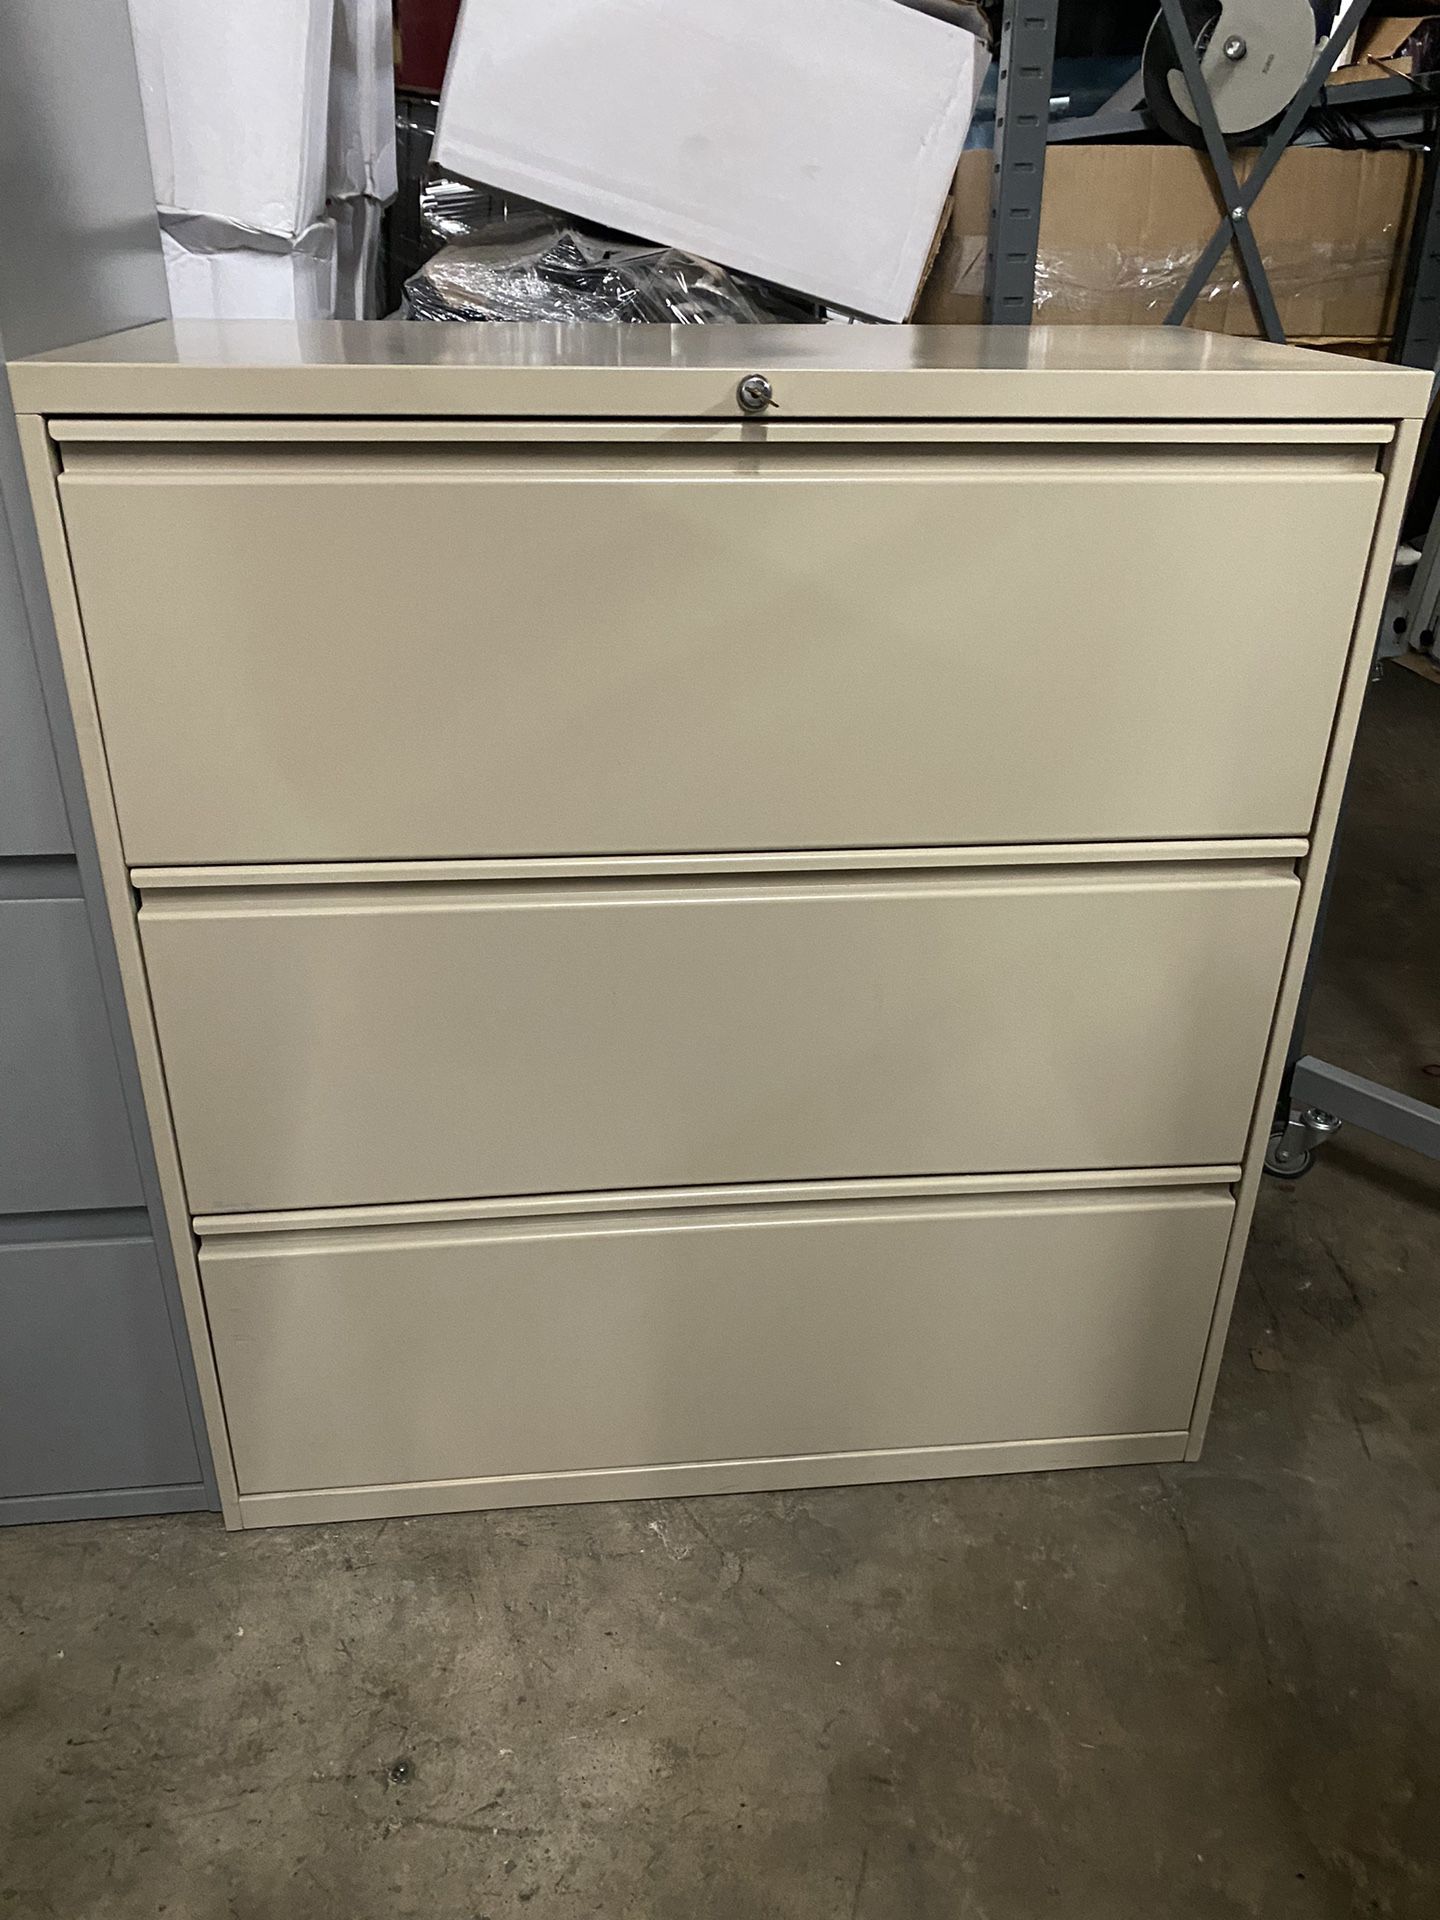 Metal Lateral File Cabinet 